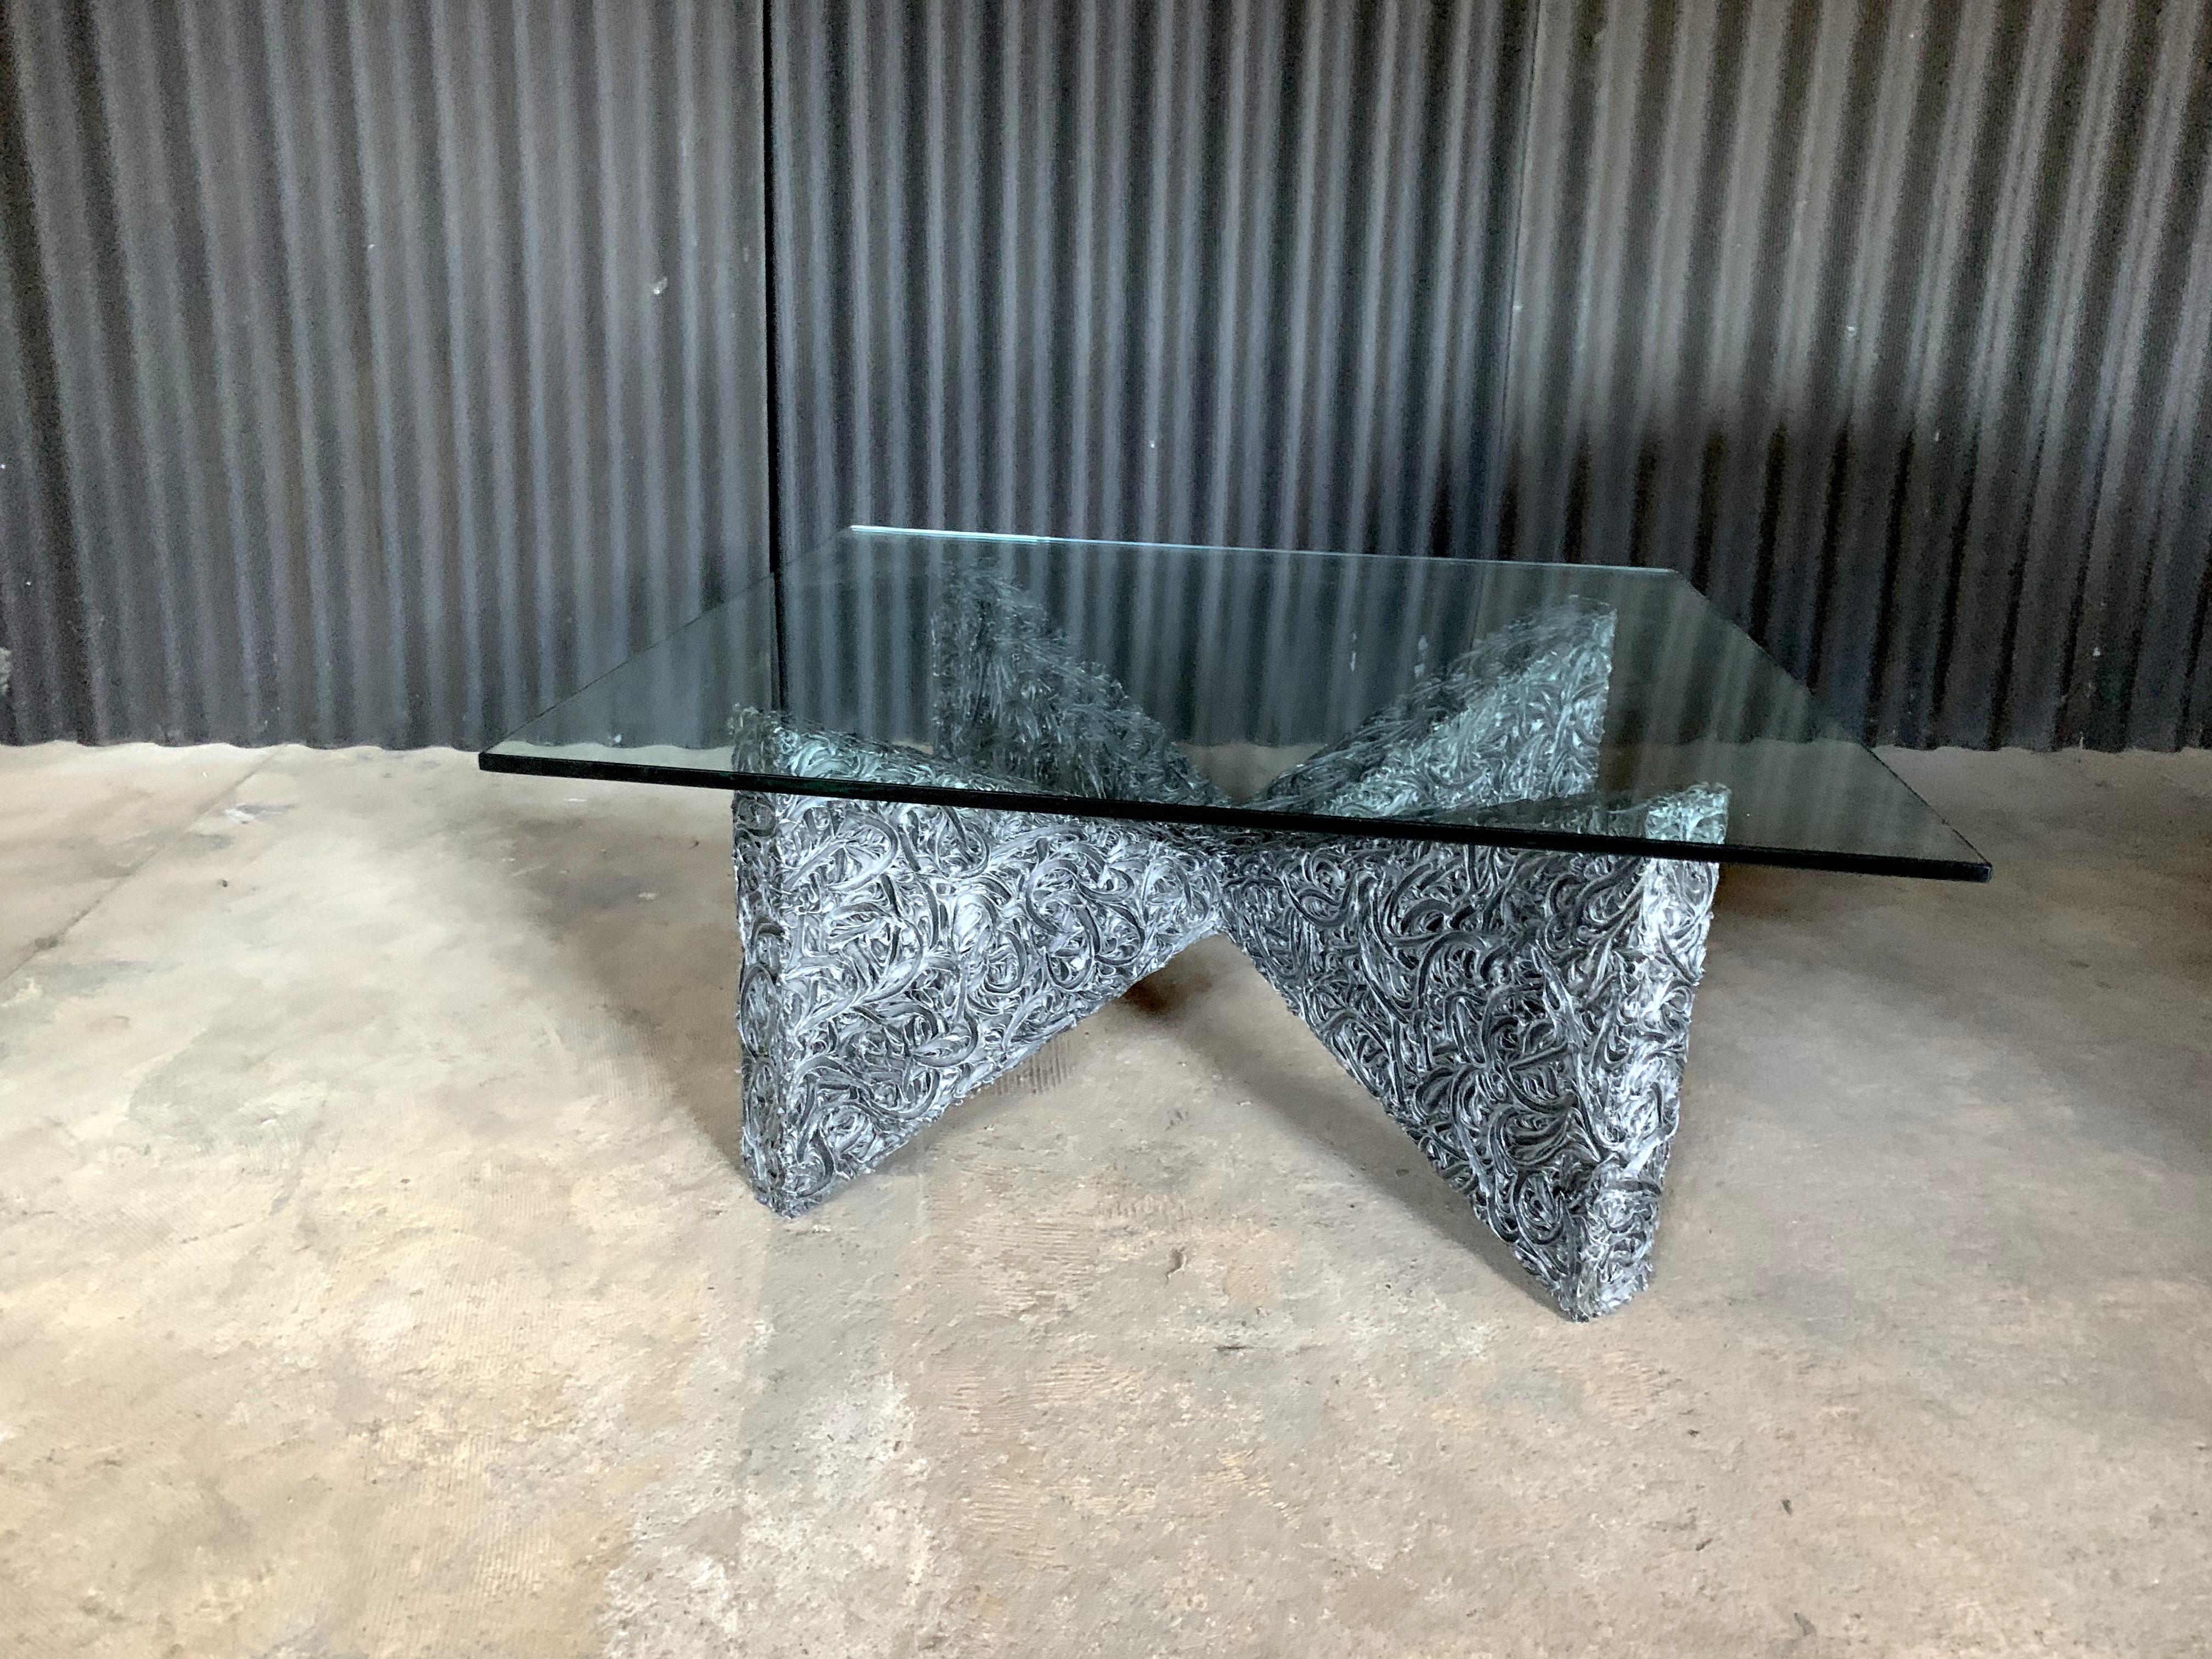 Incredible Brutalist Adrian Pearsall for Craft Associates coffee table.
Table base is in incredible condition. Cannot locate and breaks or missing resin.
Glass is 1/2